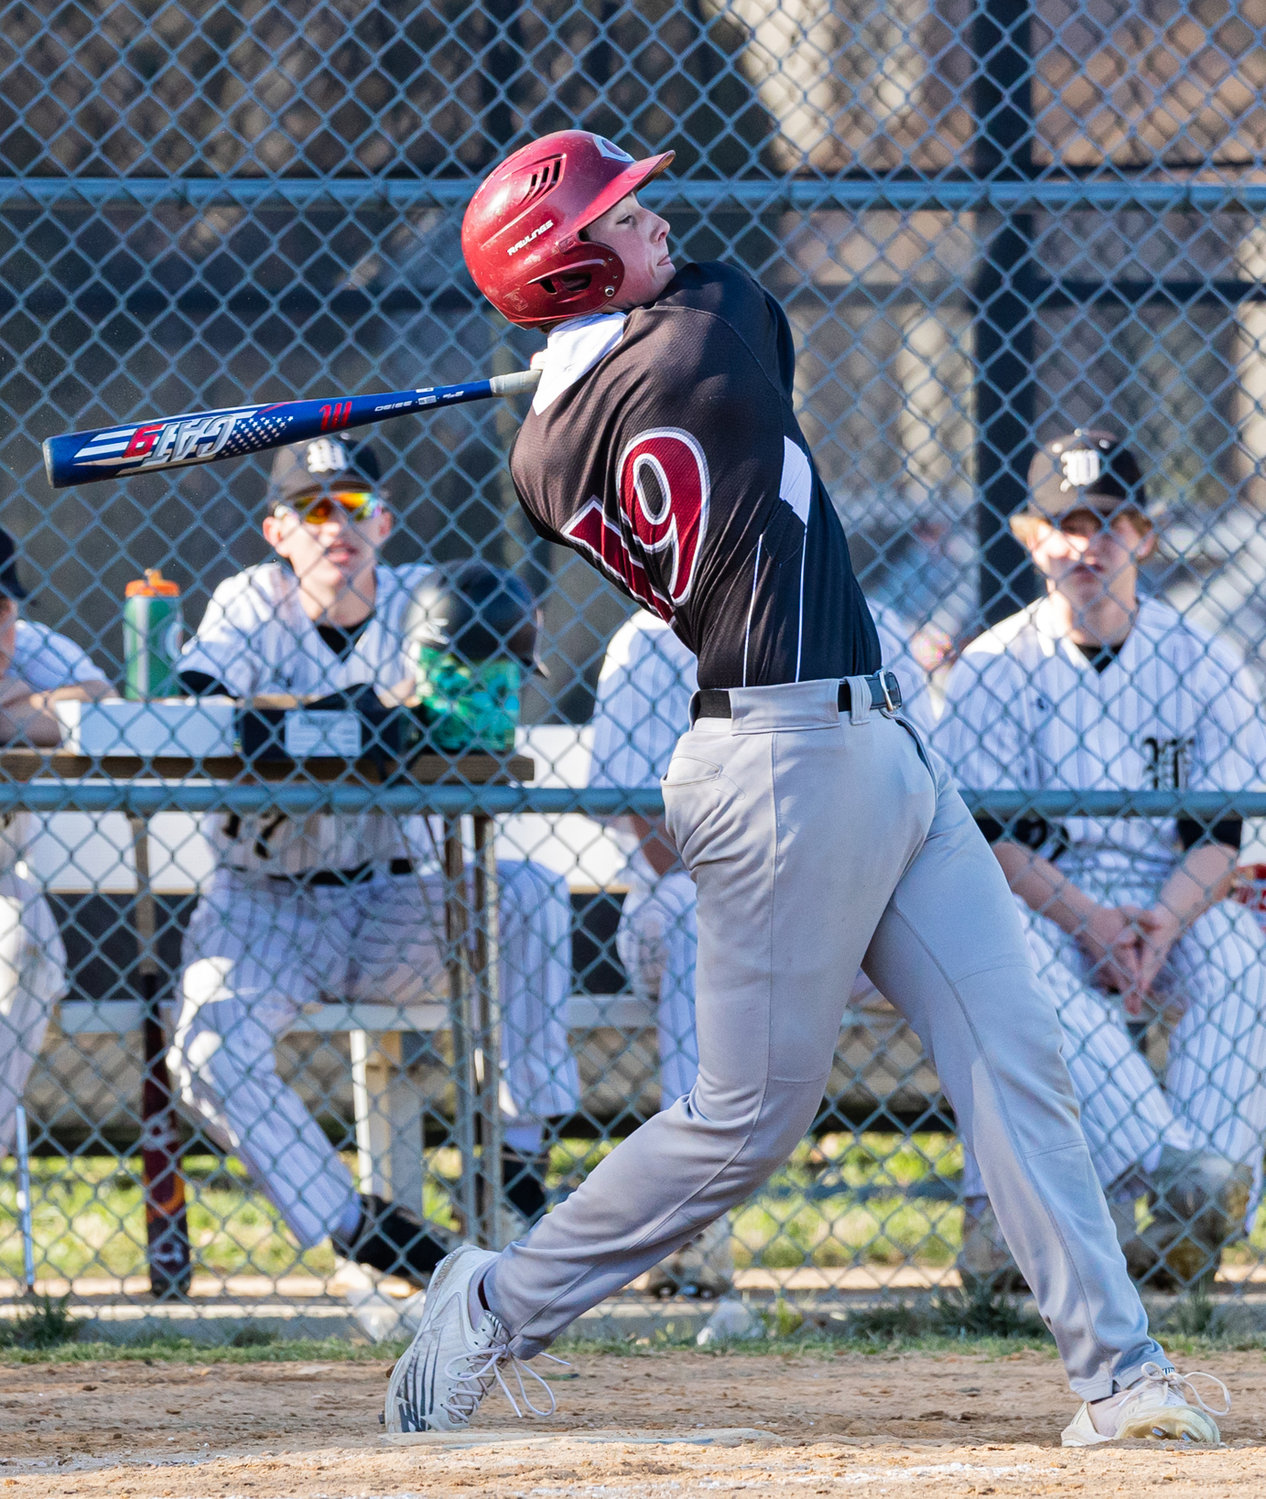 Senior Jacob Dandic cracked a three-run bomb in the seventh inning to lift the Rams to a win over Plainedge on April 21.